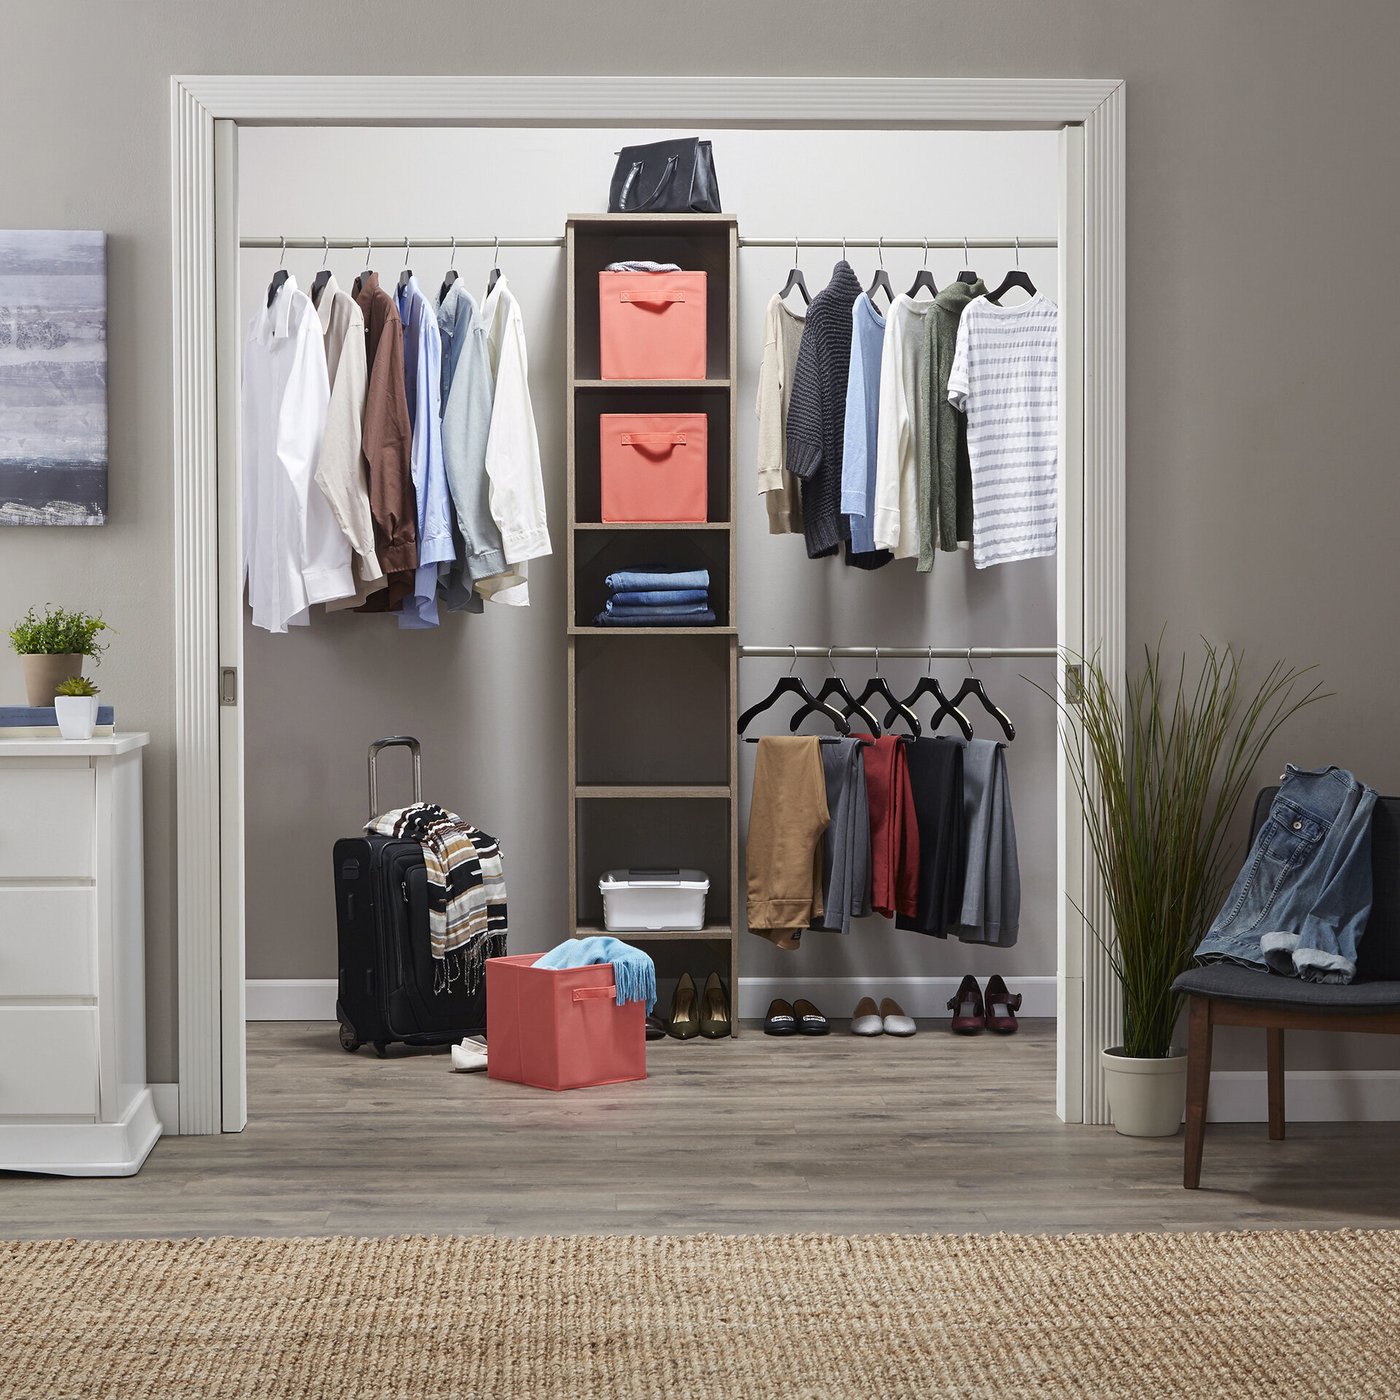 4 Expert Tips To Choose A Closet System - VisualHunt